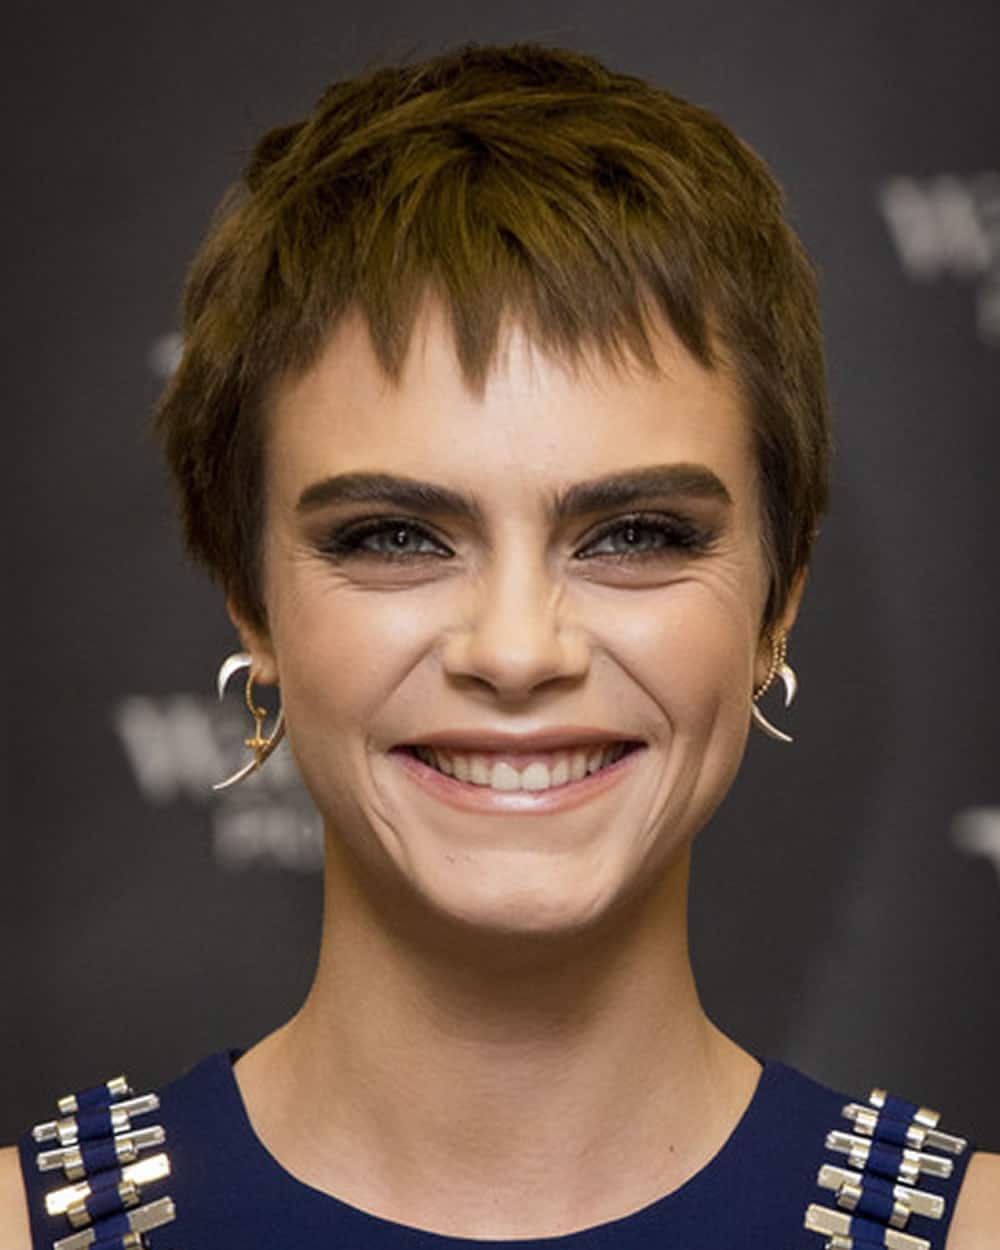 Some winning Celeb Short Haircuts of 2018 some winning celeb short haircuts of 2018 11 photo